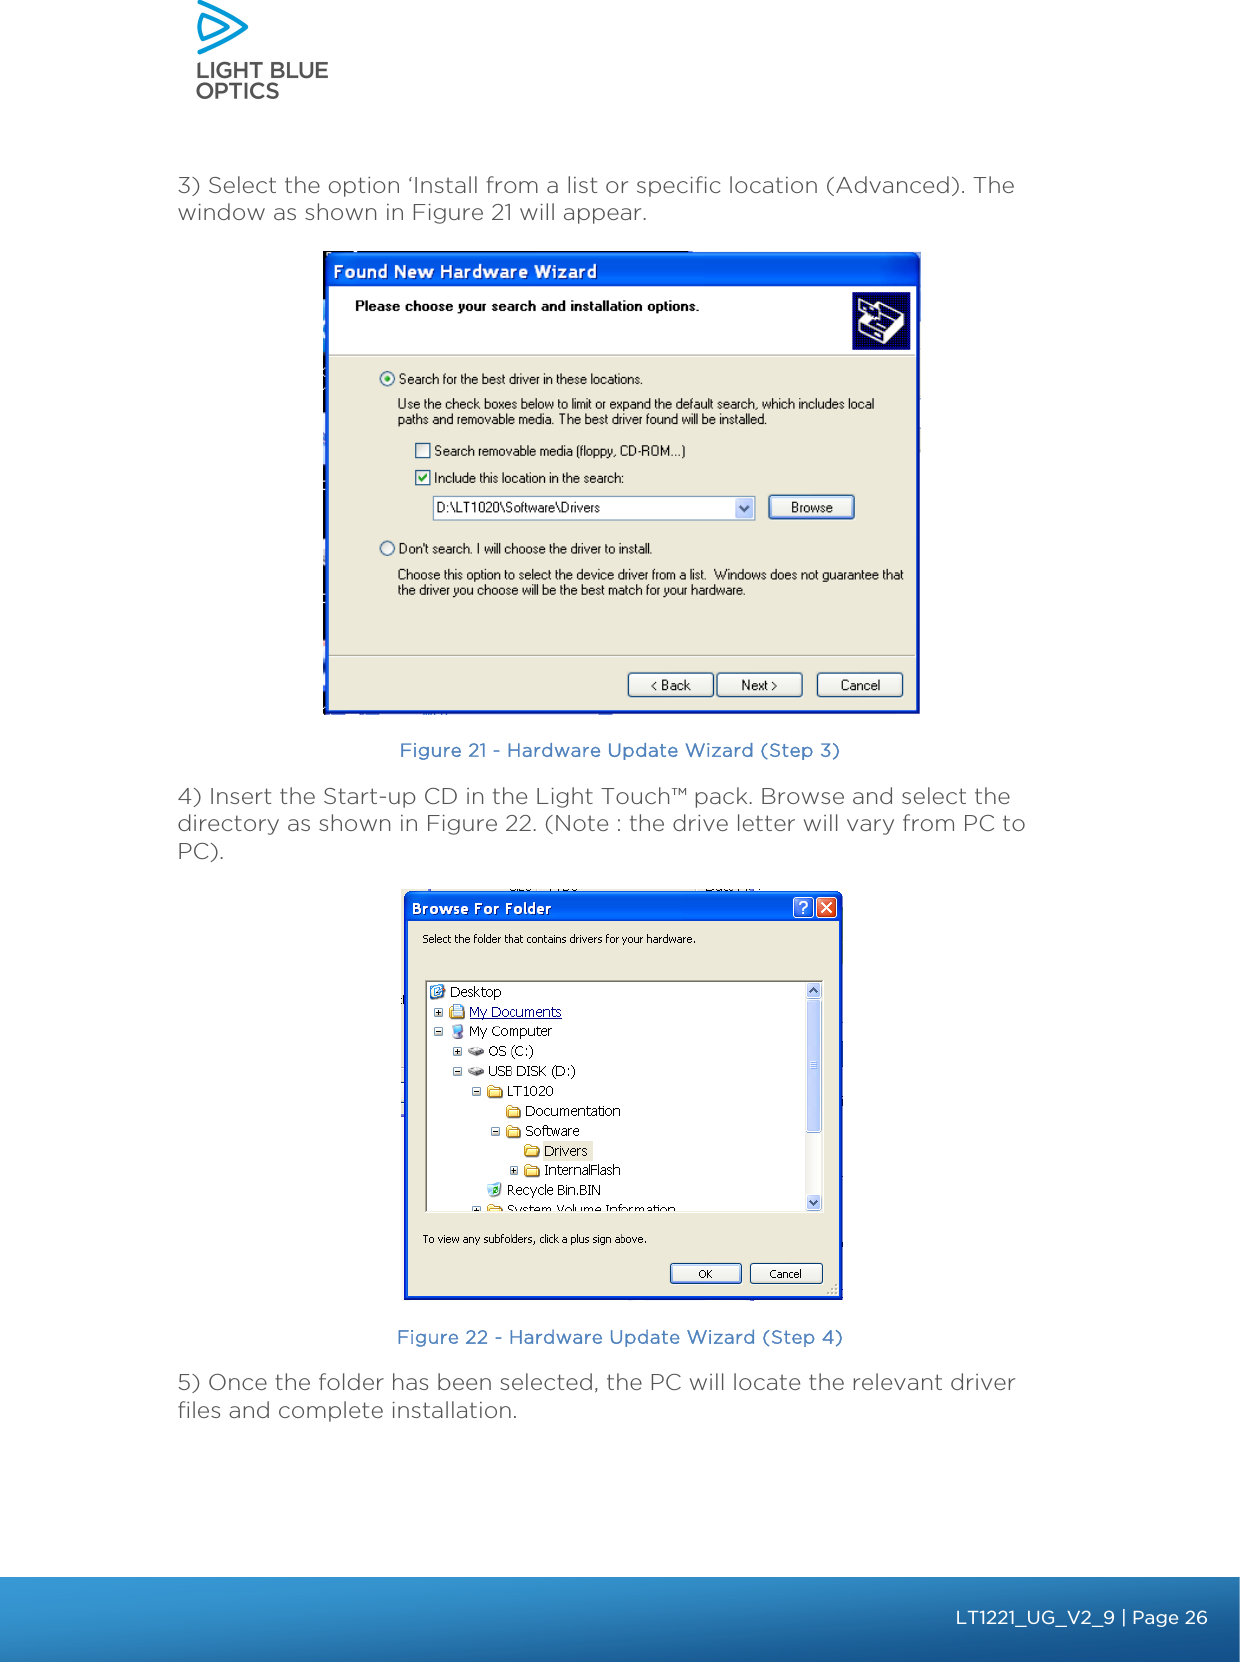    3) Select the option ‘Install from a list or specific location (Advanced). The  window as shown in Figure 21 will appear.  Figure 21 - Hardware Update Wizard (Step 3) 4) Insert the Start-up CD in the Light Touch™ pack. Browse and select the directory as shown in Figure 22. (Note : the drive letter will vary from PC to PC).   Figure 22 - Hardware Update Wizard (Step 4) 5) Once the folder has been selected, the PC will locate the relevant driver files and complete installation.  bbb Light Touch LT1020 – User Guide v1.1 – Application Release C1.0.0 | Page 26LT1221_UG_V2_9| Page 26